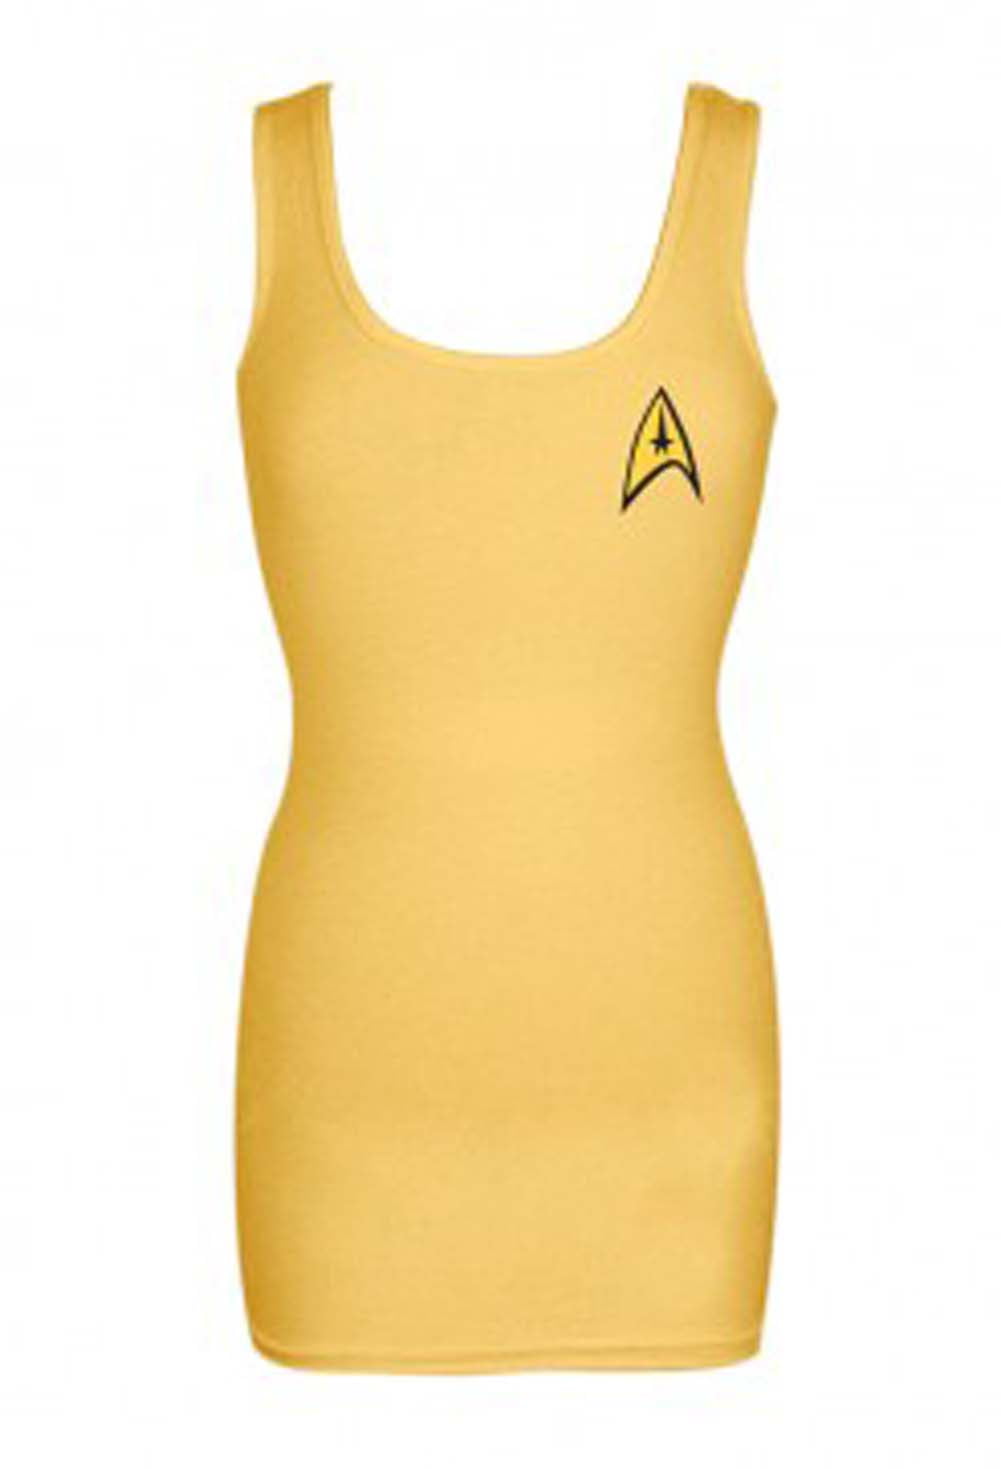 Details about  / Star Trek TOS /"Ship For My Captain/" Dye Sublimation Girl/'s Junior Babydoll Tee